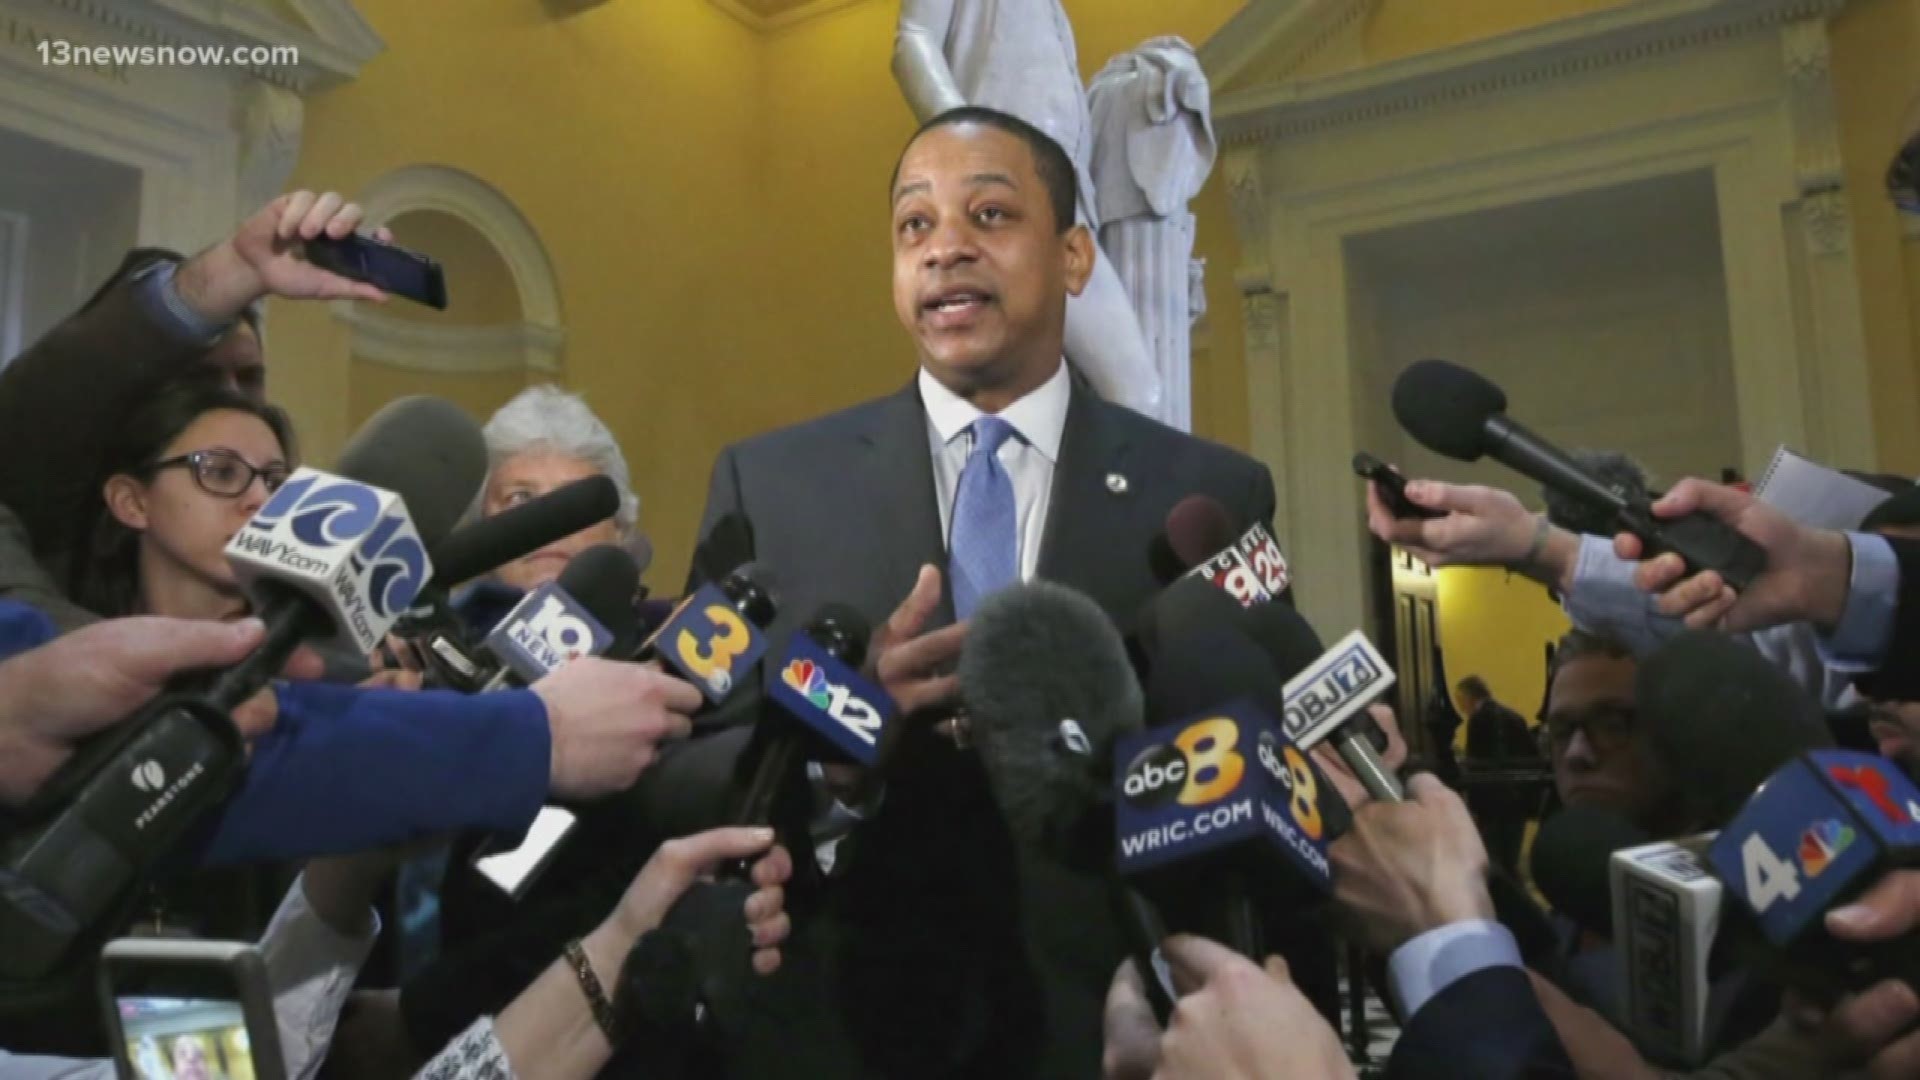 Lt. Gov. Justin Fairfax compared himself to Jim Crow-era lynching victims as he resists widespread calls to resign, prompted by allegations of sexual assault.